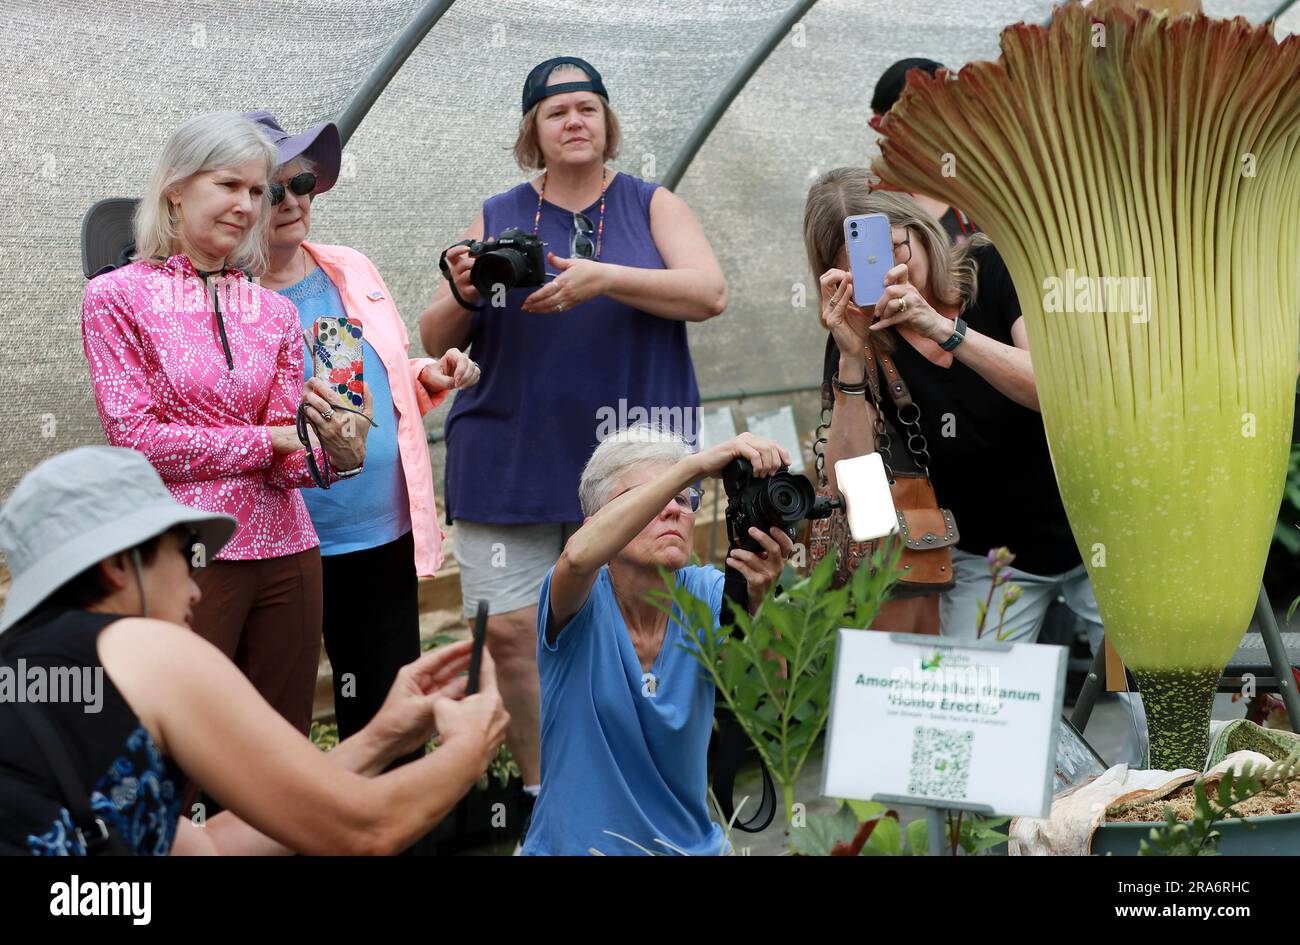 July 1, 2023, Raleigh, North Carolina, USA: Visitors line up to take photos of ''˜HOMO ERECTUS, ' a rare corpse flower during the second day of its bloom at Juniper Level Botanical Garden in Raleigh, NC. Amorphophallus titanum is one of the biggest, stinkiest flowers in the plant kingdom and is commonly known as the corpse flower due to its smell of rotting flesh as it blooms. It typically takes 7-10 years of vegetative growth before the corpse flower blooms for a total of 2-3 days. The flower is so rare that fewer than 1,000 Titan Arums have flowered in cultivation worldwide. (Credit Image: Stock Photo